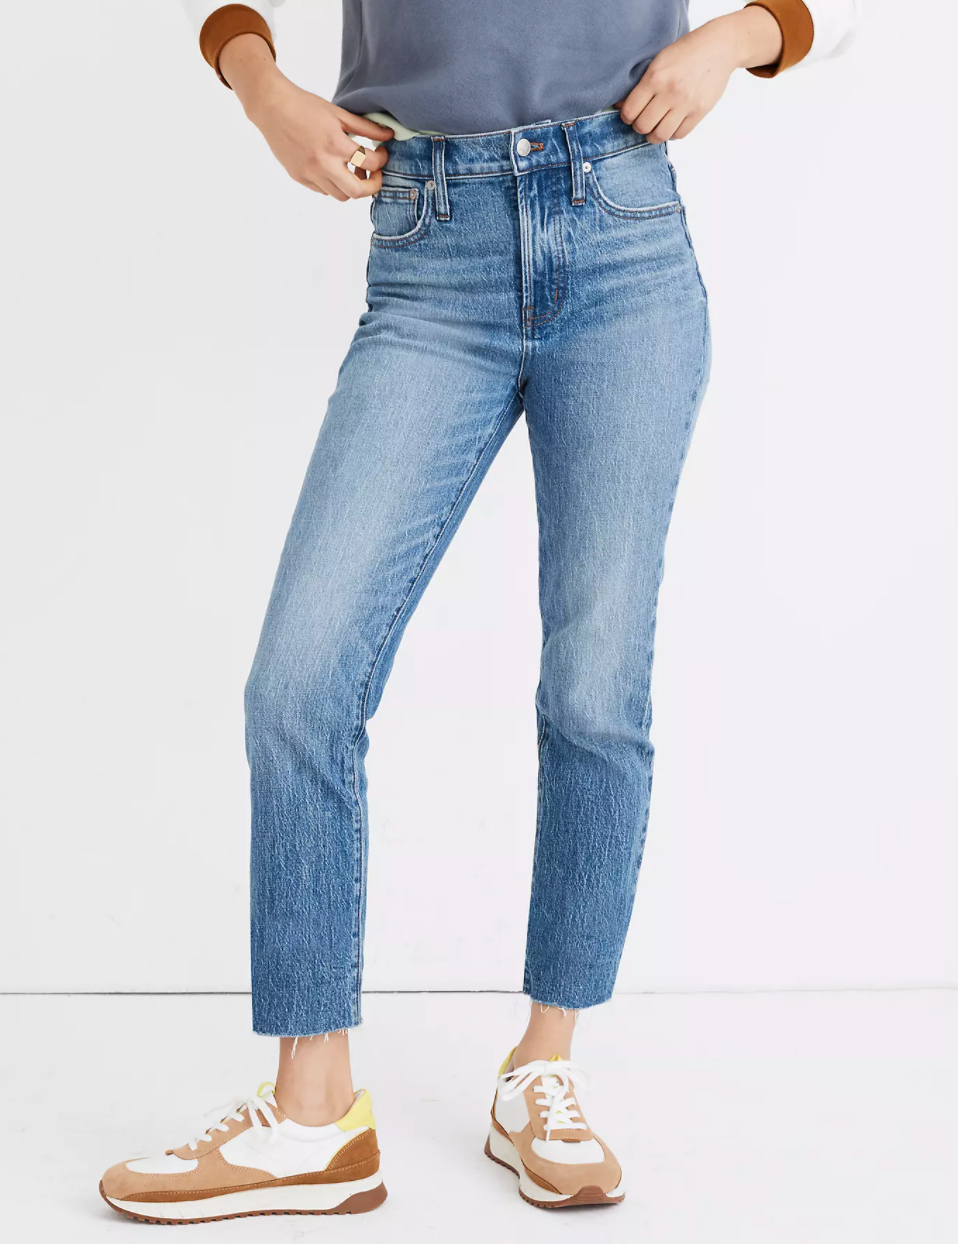 Madewell + The Perfect Vintage Jean in Enmore Wash: Raw-Hem Edition